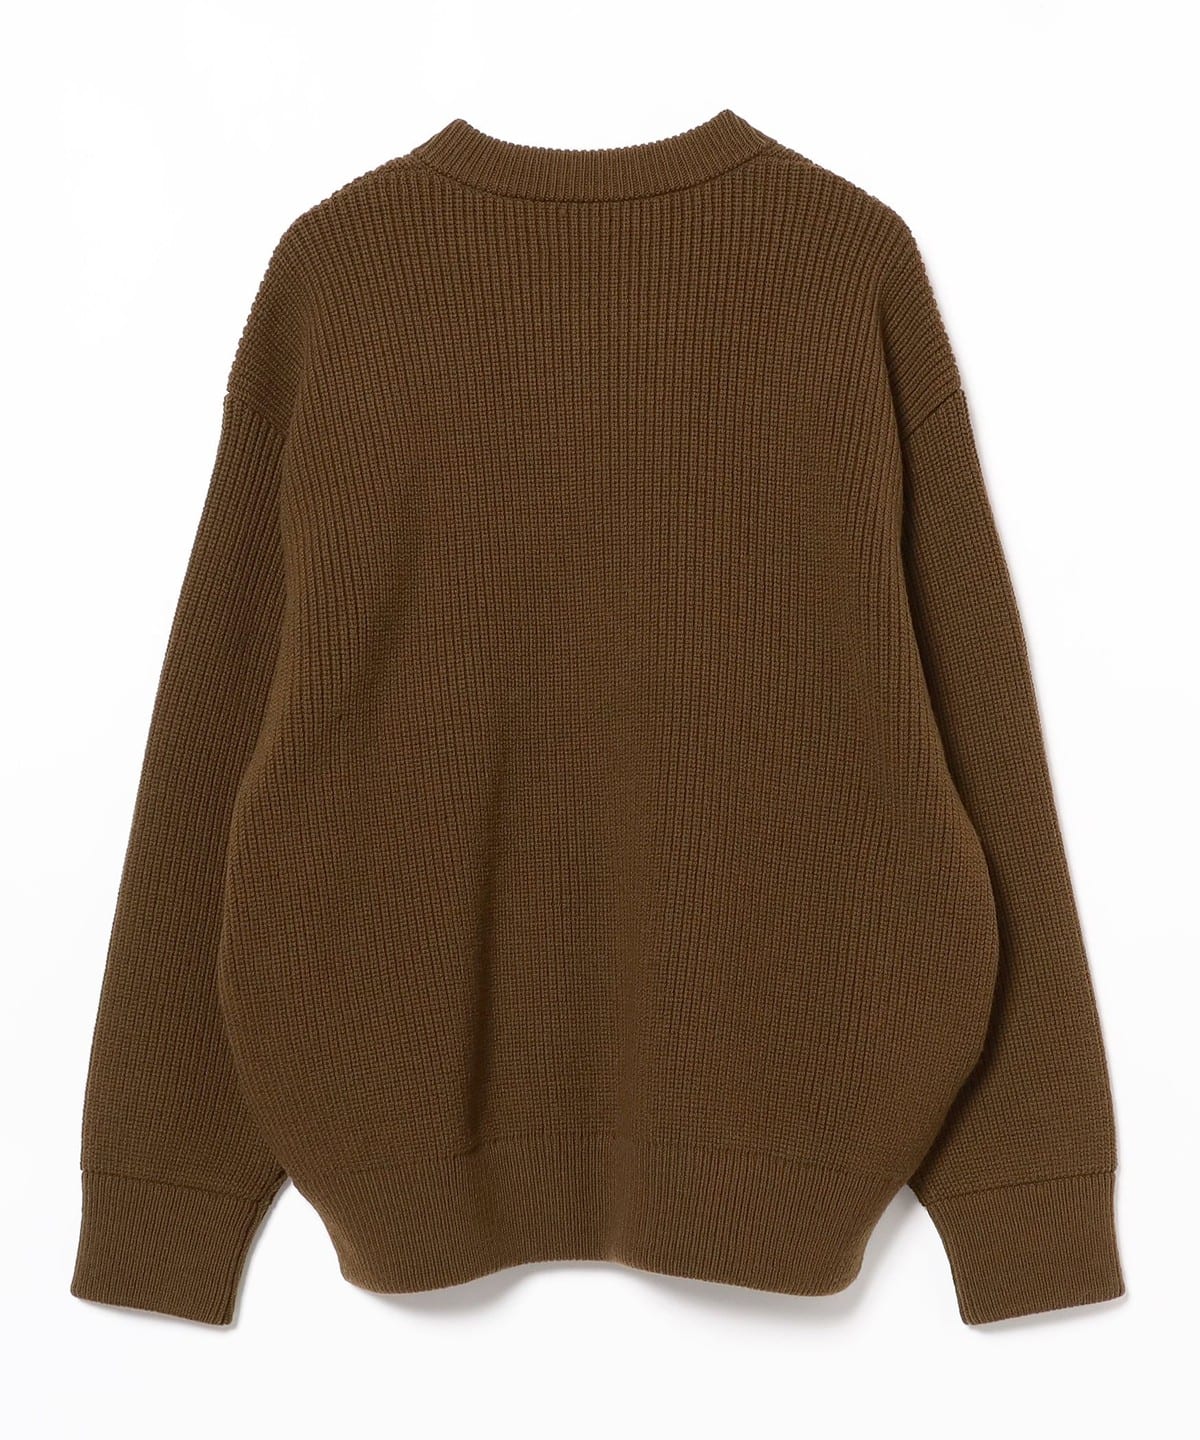 stein 23ss OVERSIZED DRIVERS KNIT sサイズ - トップス